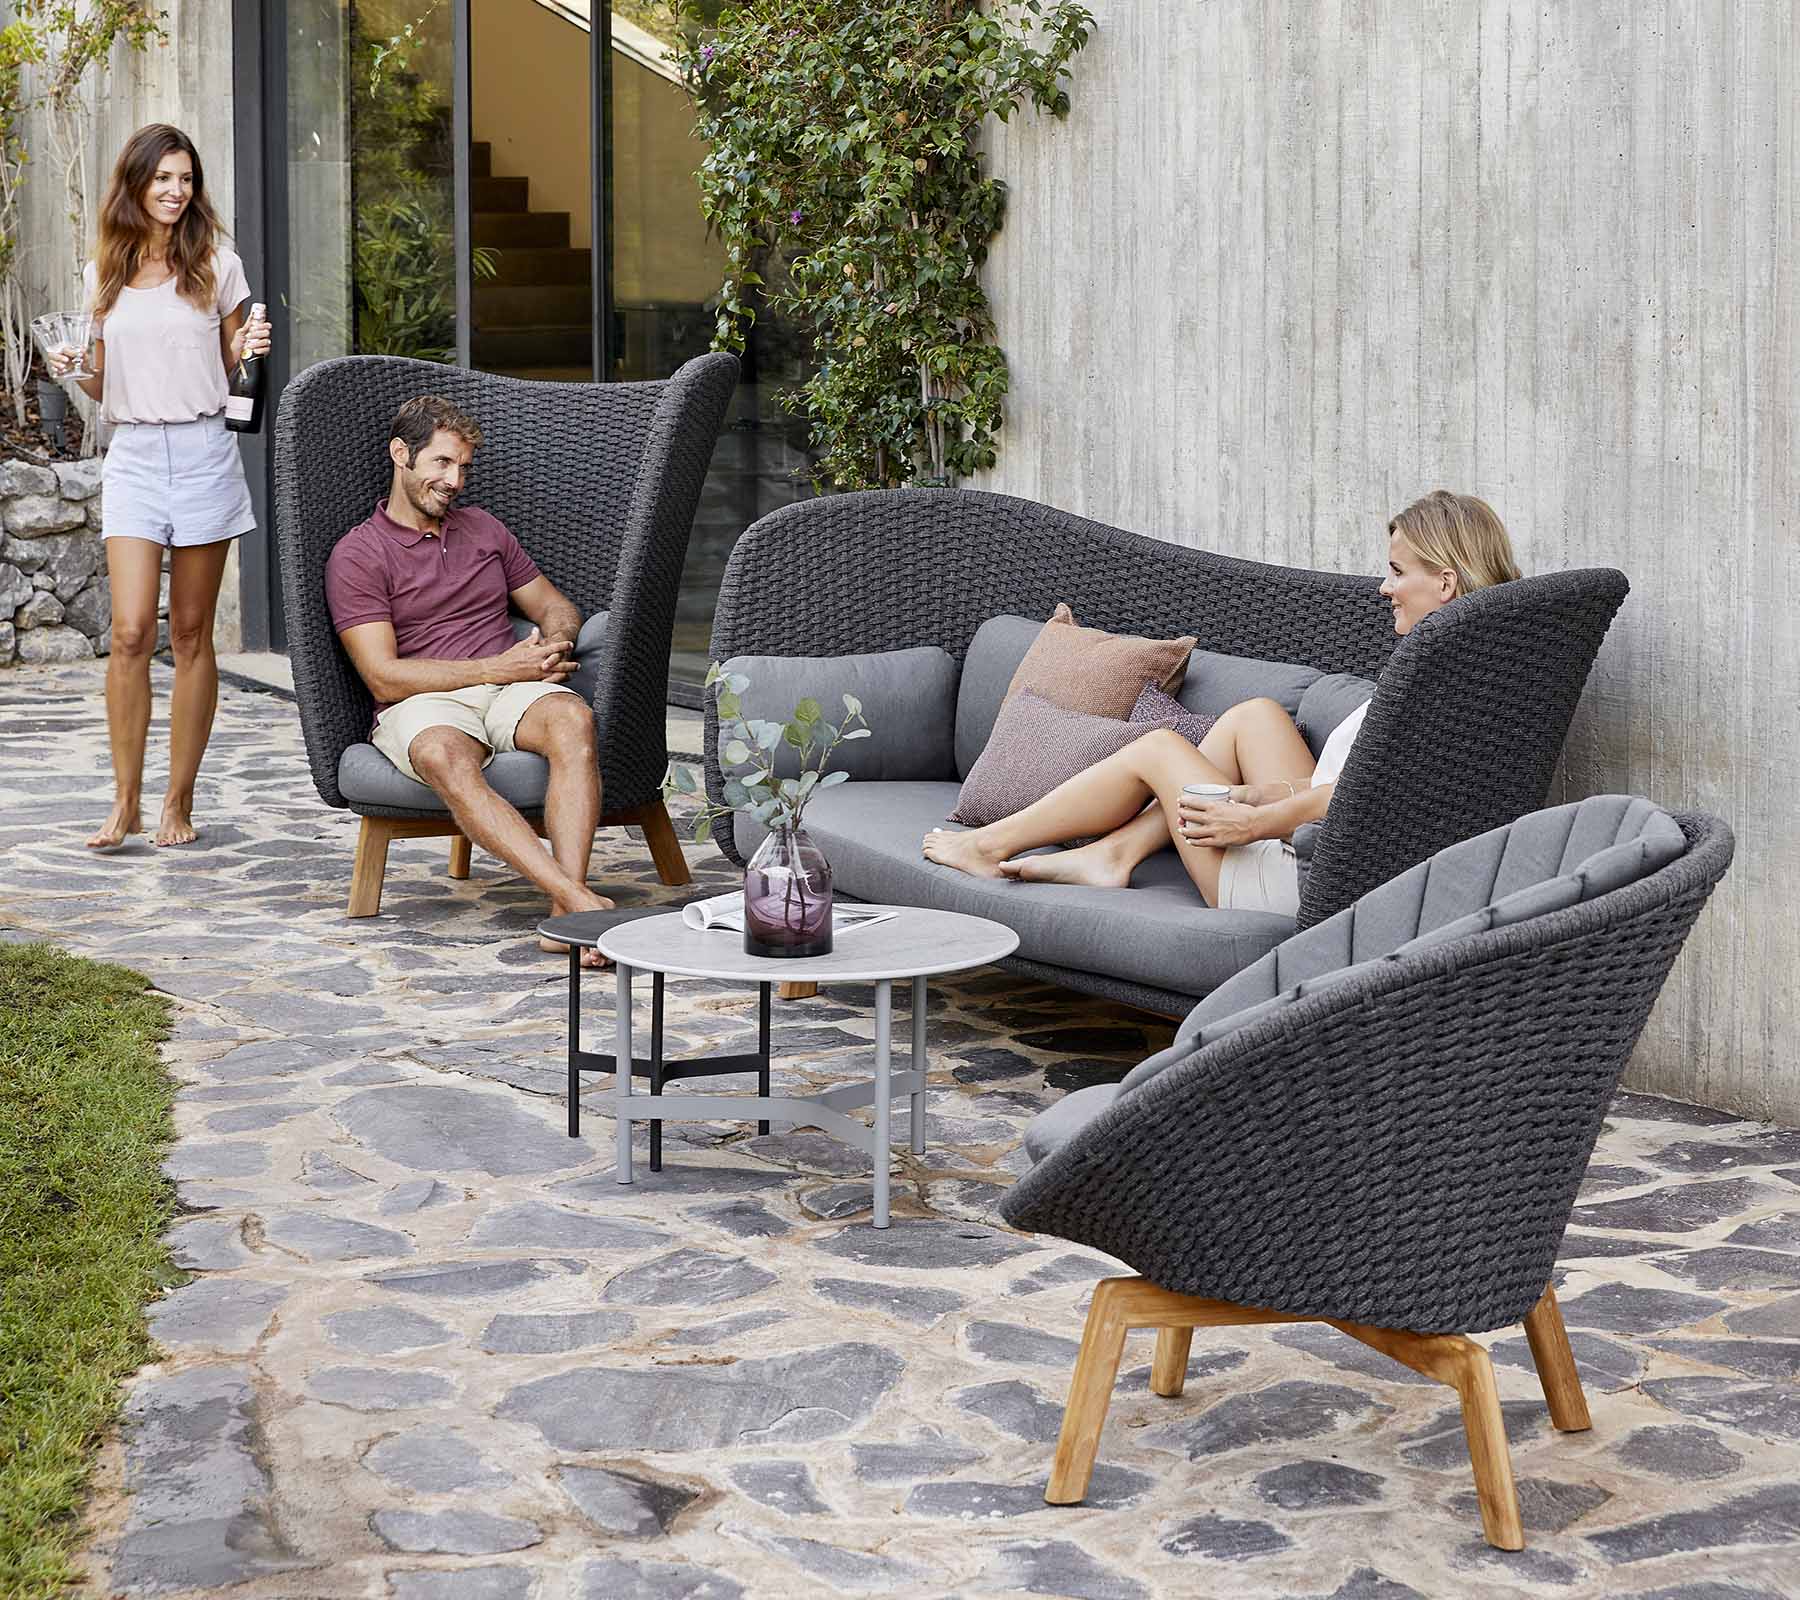  Boxhill's Peacock dark grey outdoor wing highback chair with a man sitting on it  having a chat to a woman sitting on the outdoor sofa